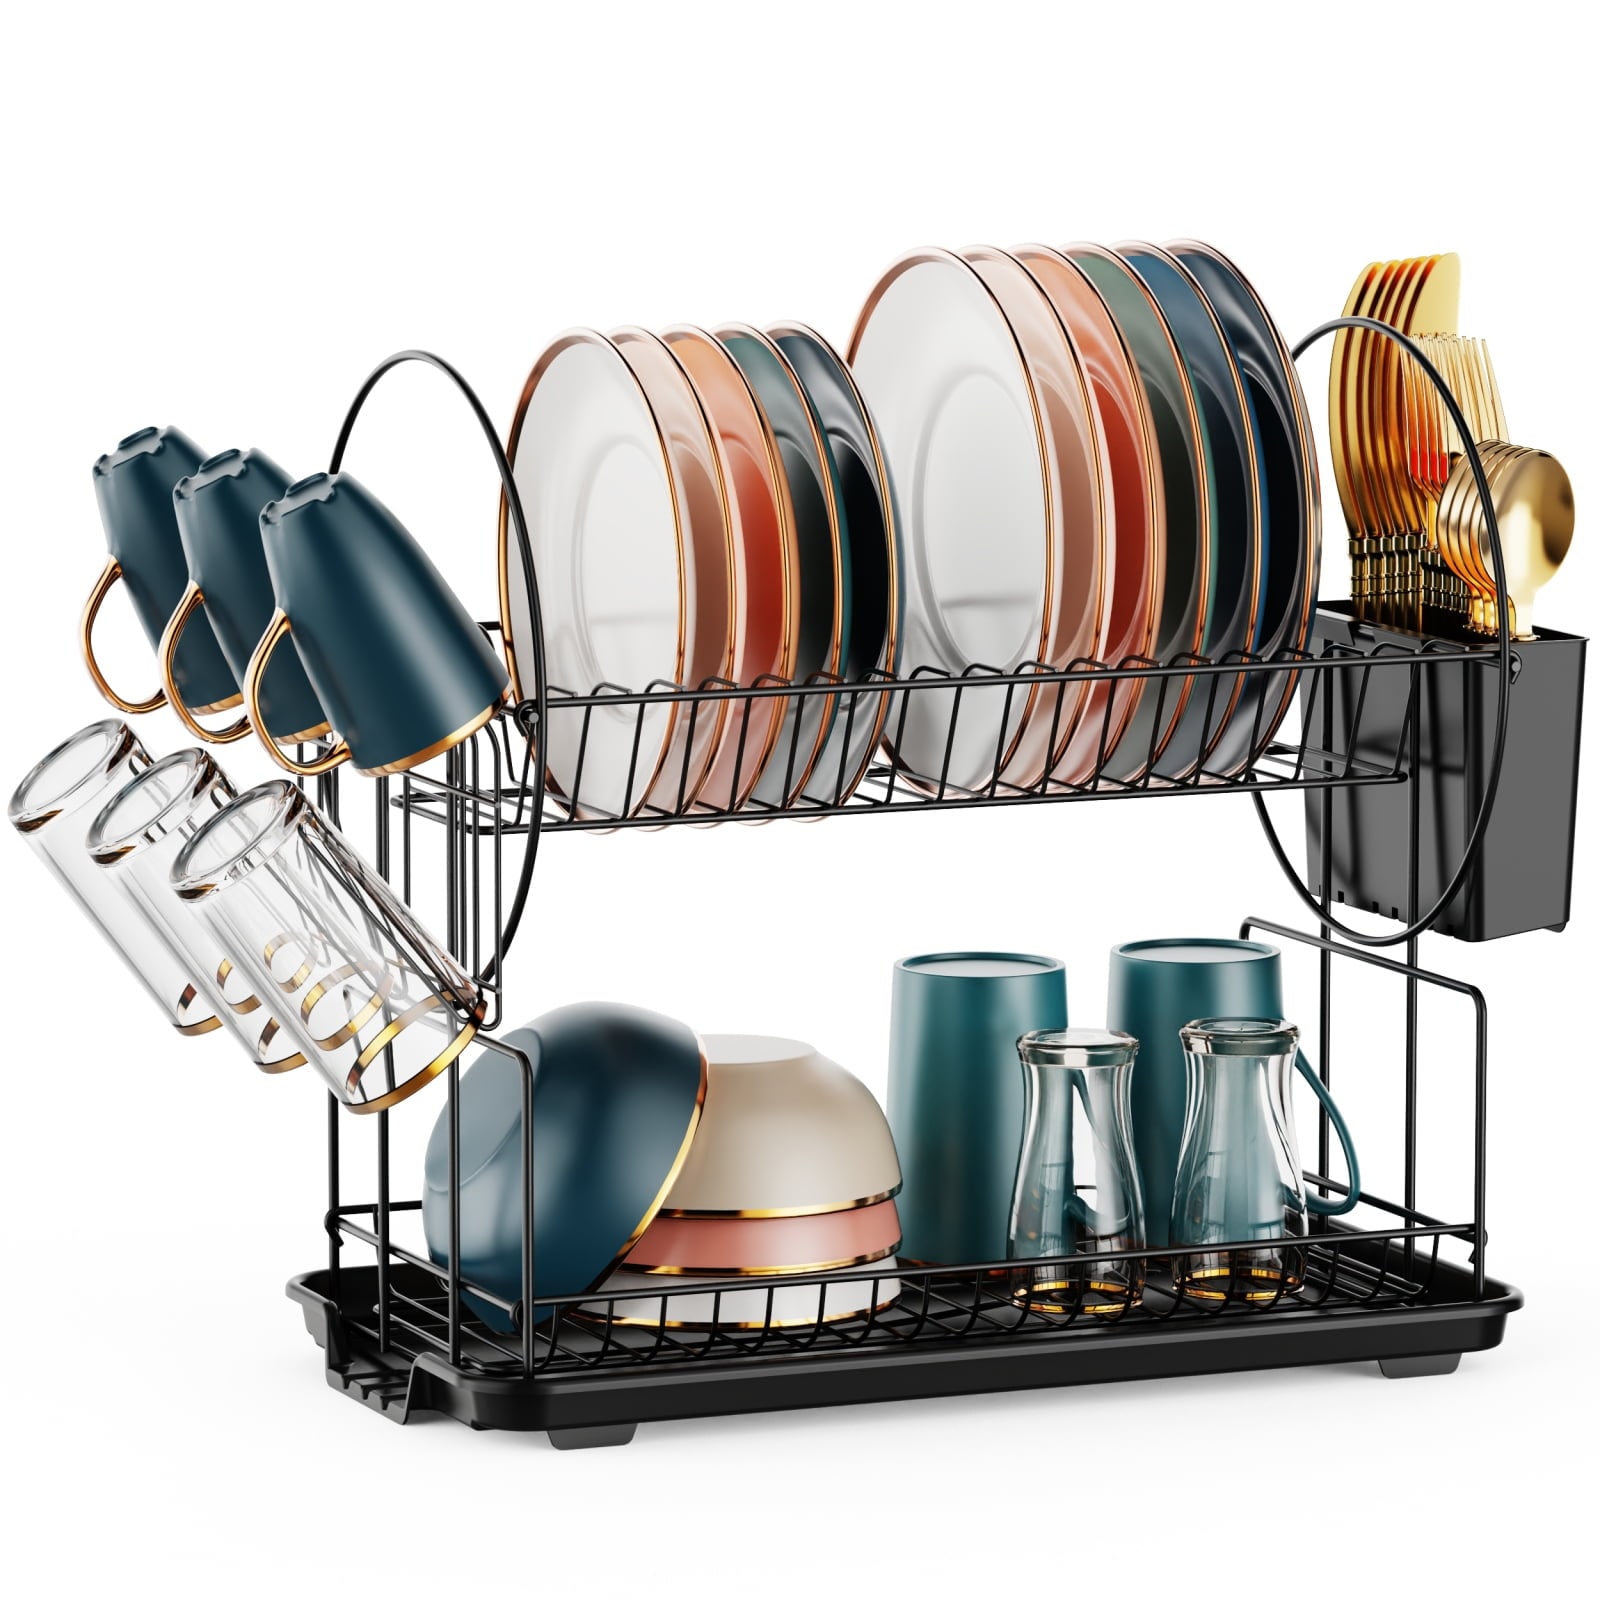 https://ak1.ostkcdn.com/images/products/is/images/direct/bcbd0f45998cc5ceac138e4f1b098ef616ab86cc/2-Tier-Dish-Rack-with-Drainer-Board.jpg